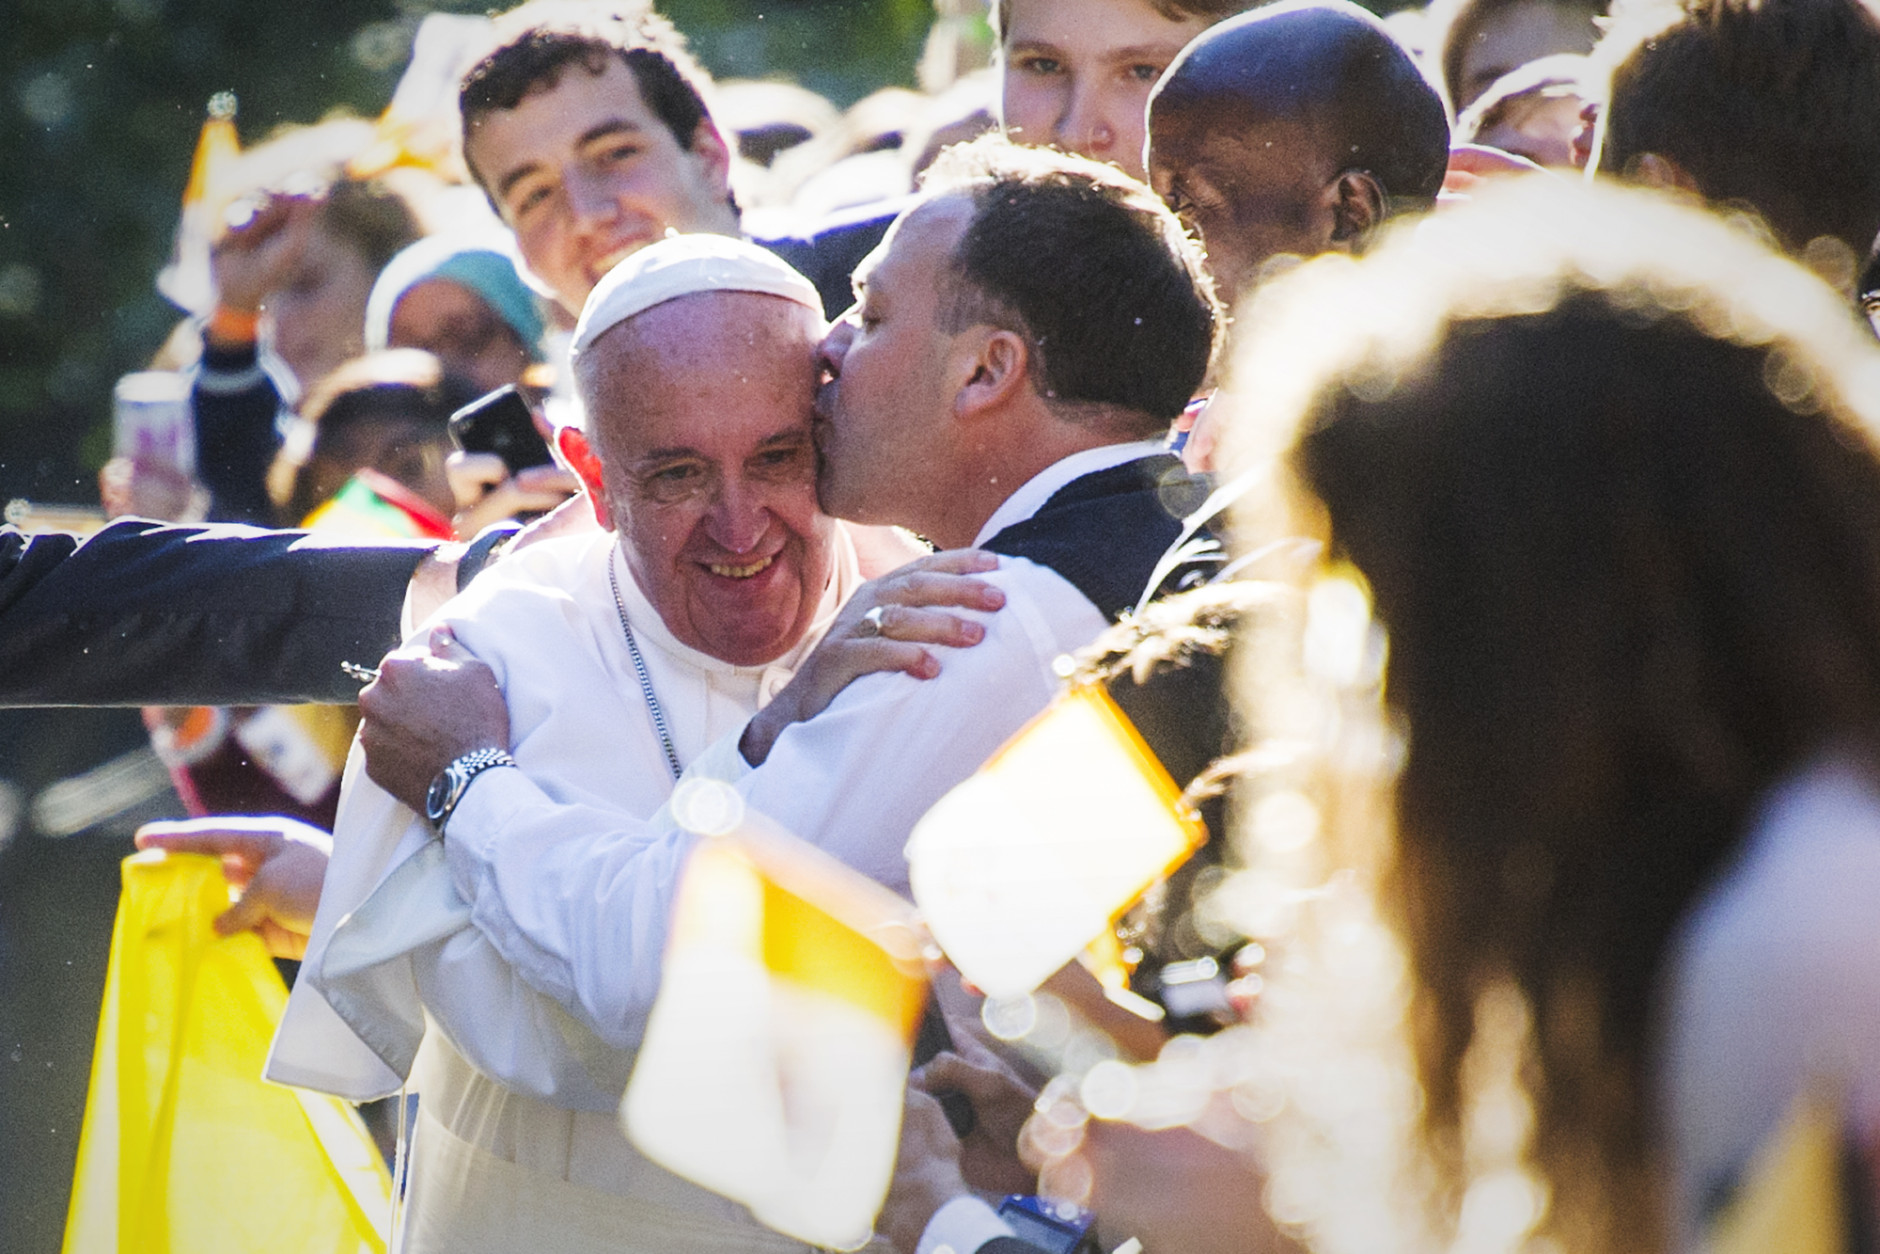 CROP OF DCCO110 * Pope Francis is kissed by a well-wisher as he departs the Apostolic Nunciature, the Vatican's diplomatic mission in the heart of Washington, Wednesday, Sept. 23, 2015. Pope Francis will visit the White House, becoming only the third pope to visit the White House.  (AP Photo/Cliff Owen)